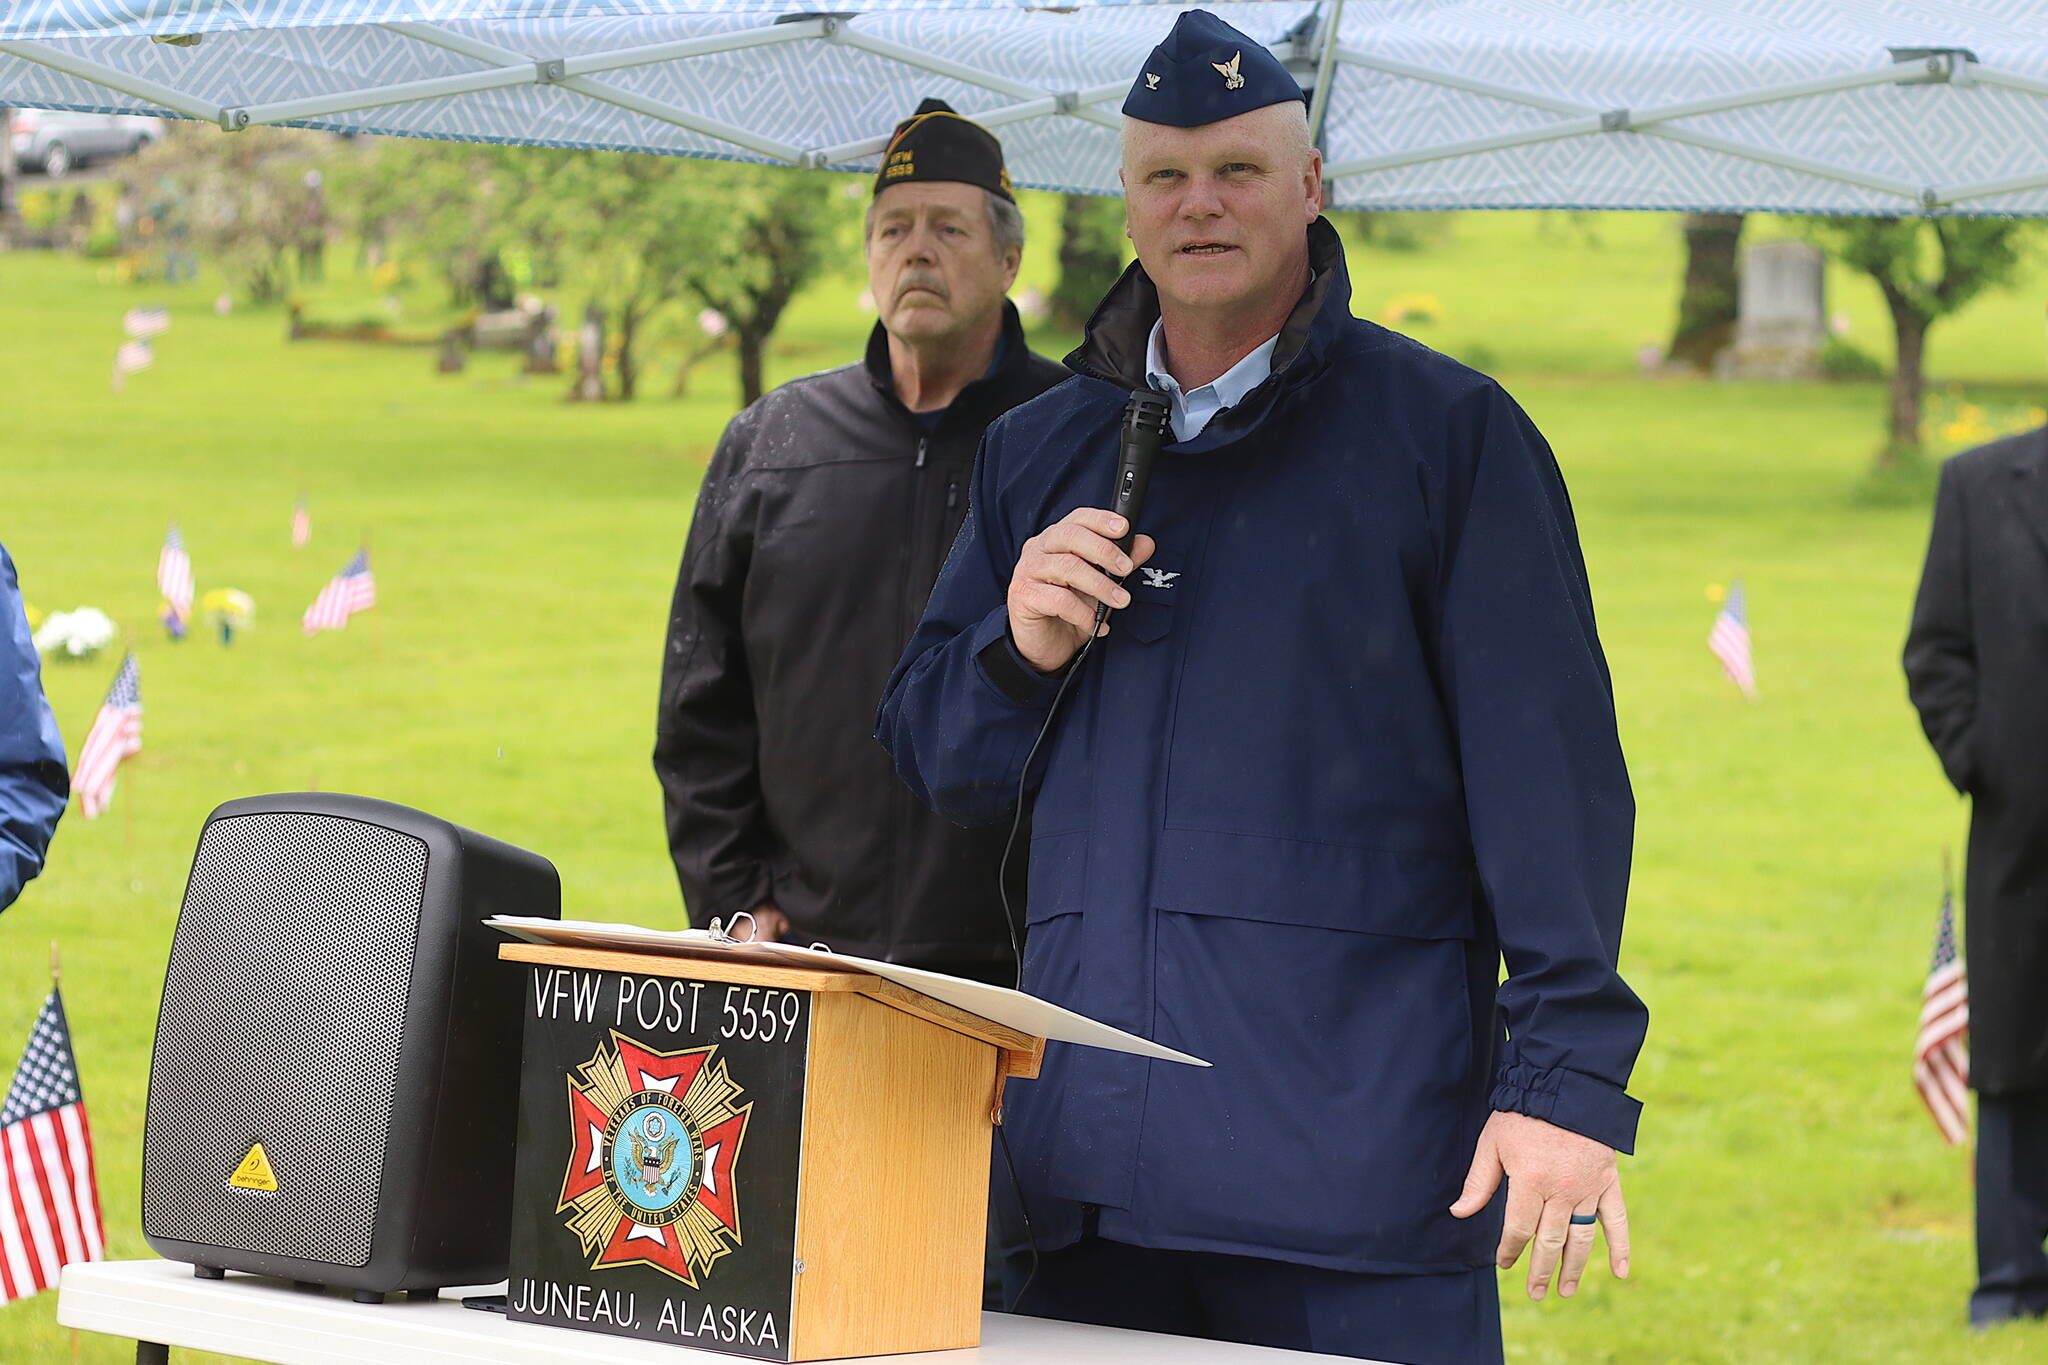 Capt. Darwin Jensen, commander of U.S. Coast Guard Sector Juneau, gives a speech to veterans and others gathered for a Memorial Day observance at Evergreen Cemetery on Monday. (Mark Sabbatini / Juneau Empire)